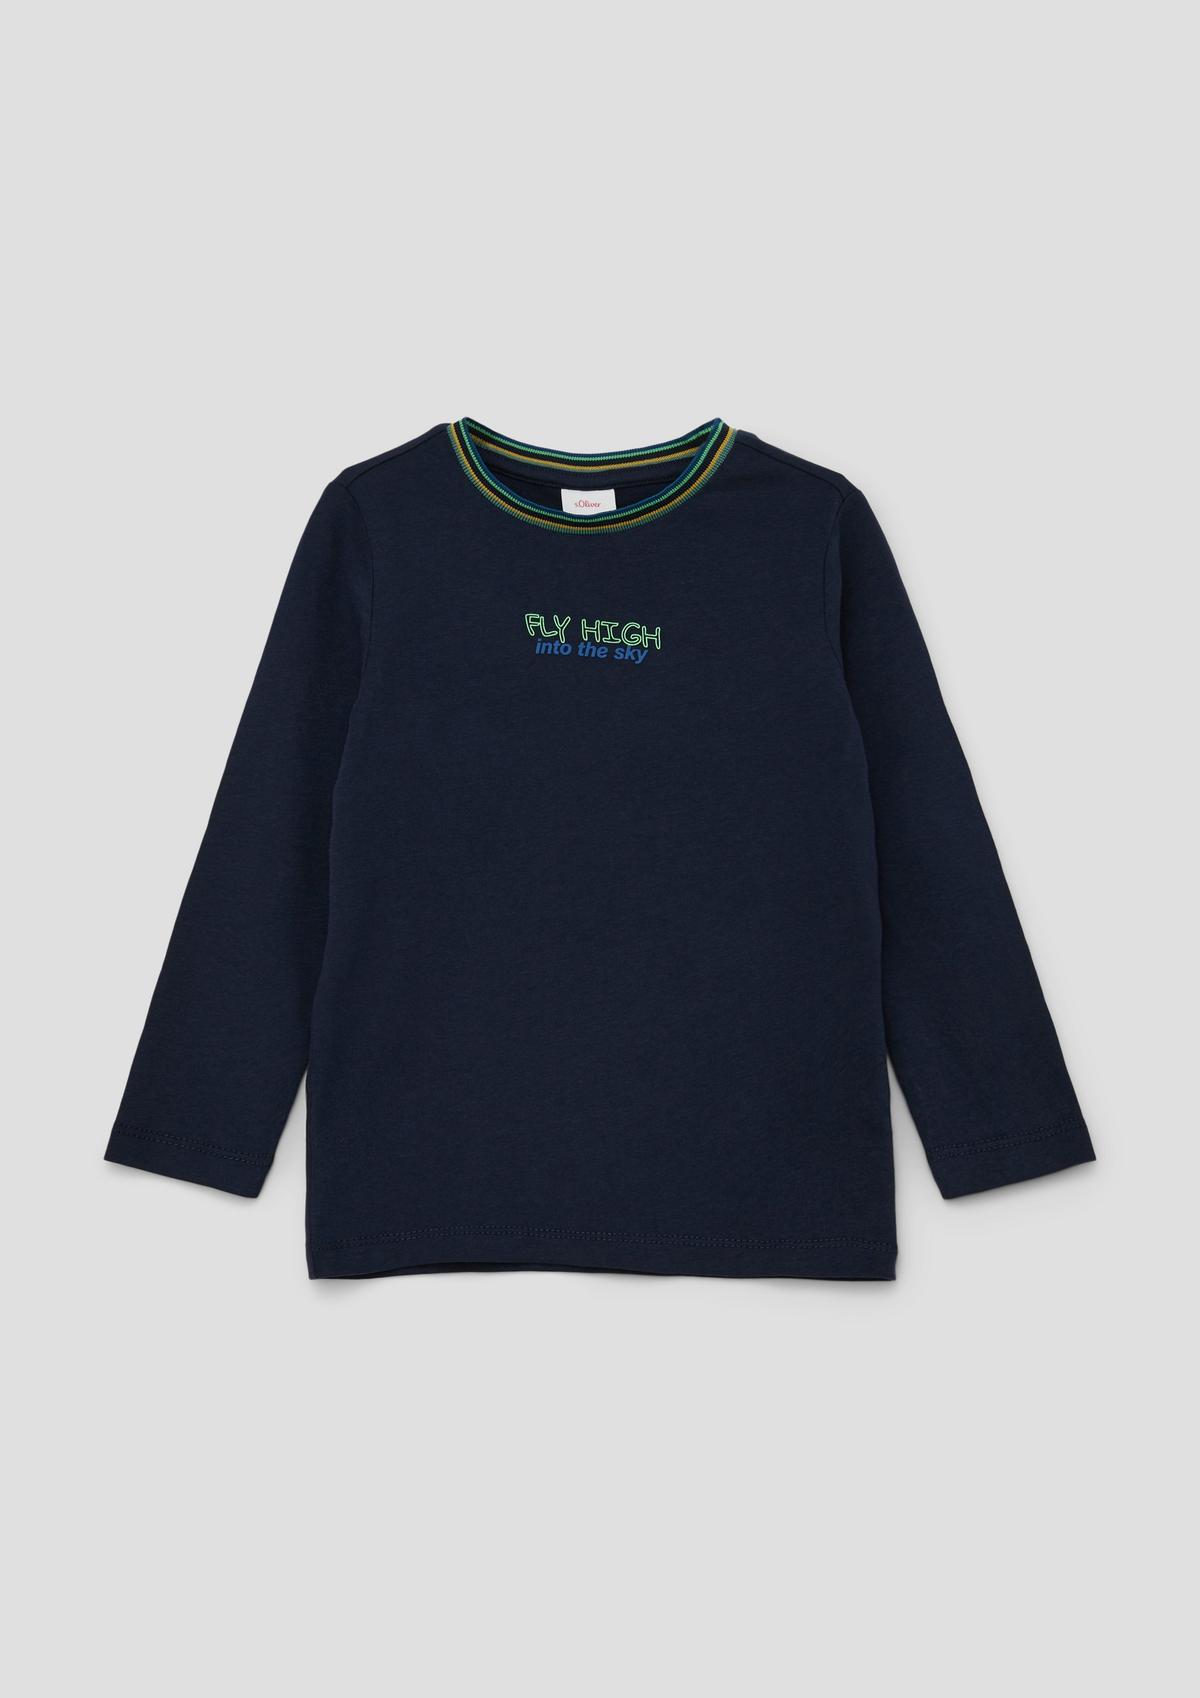 s.Oliver Long sleeve top with a lettering print